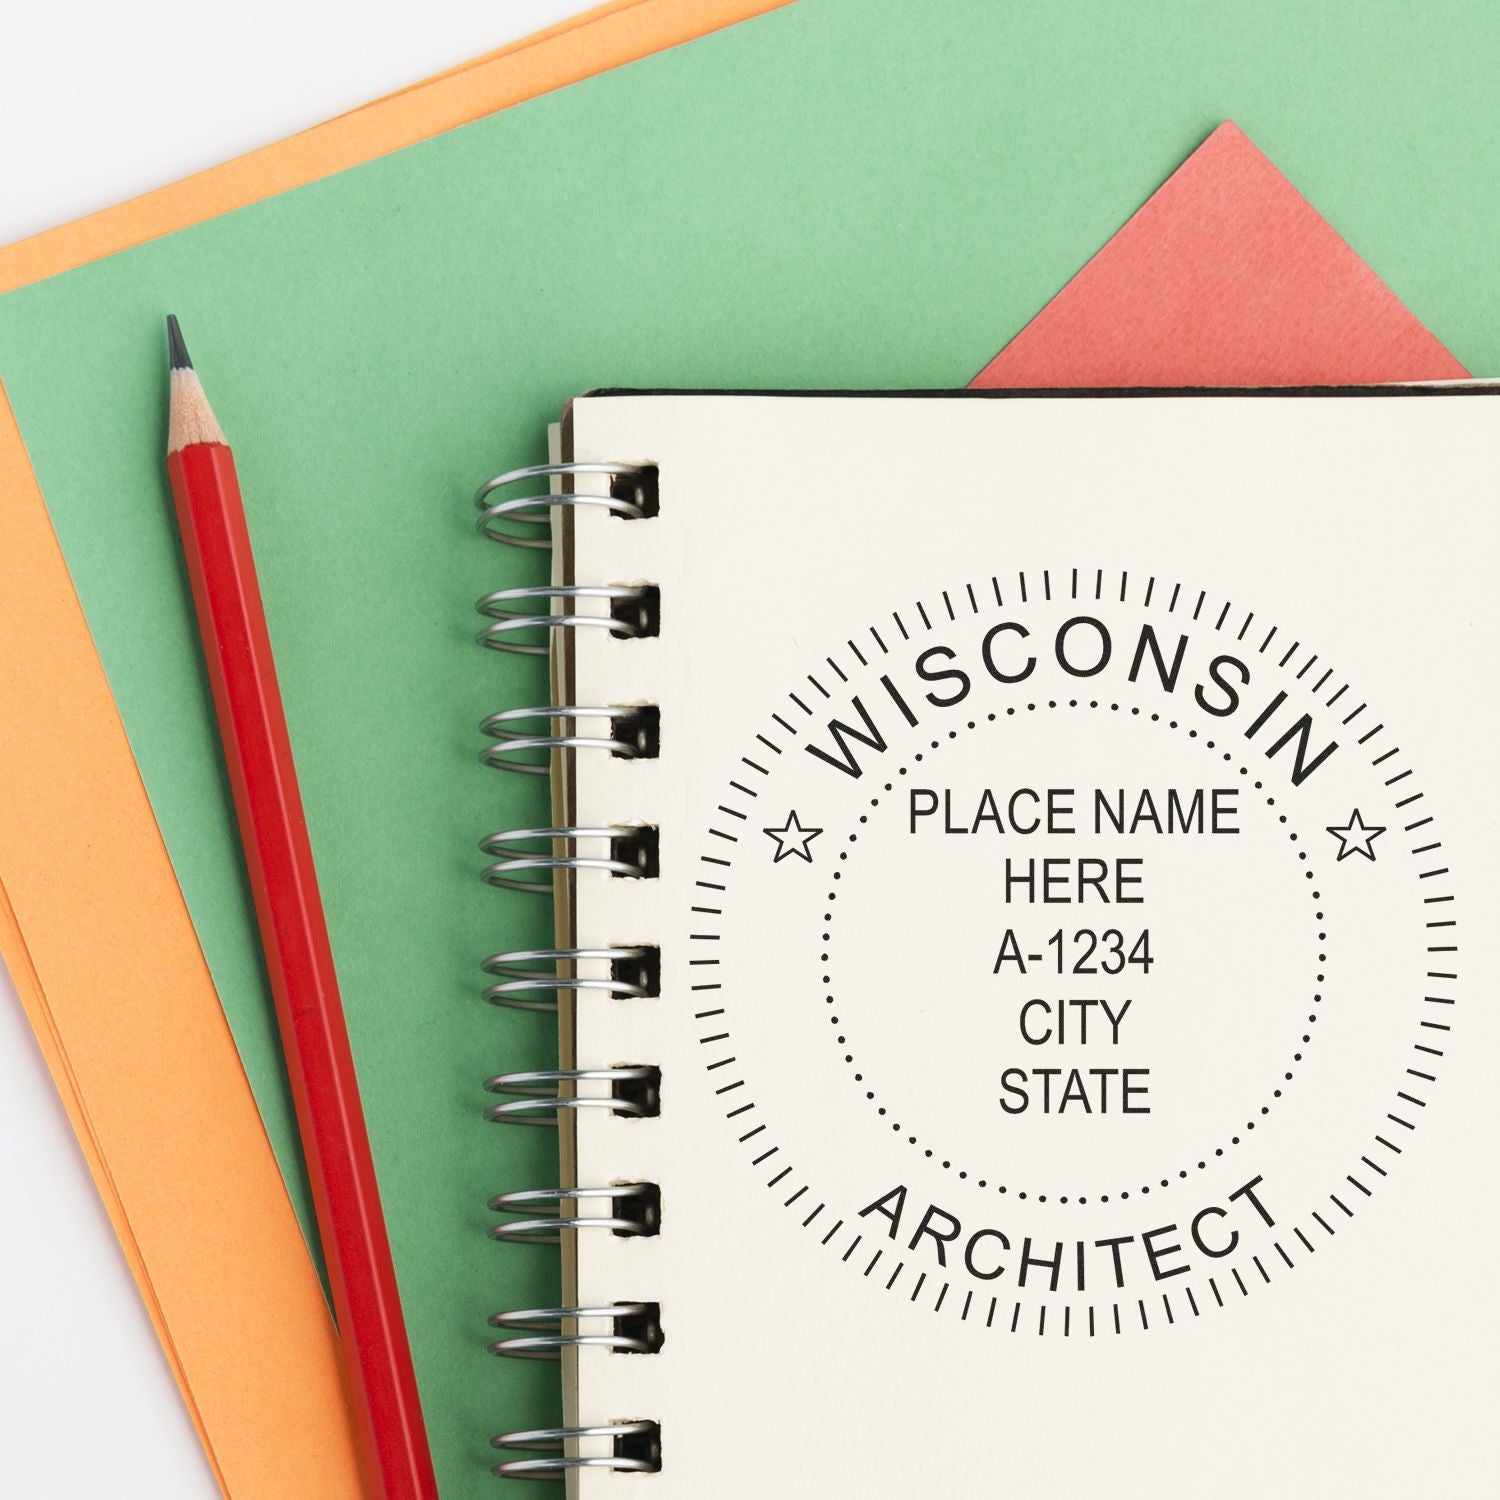 Wisconsin Architect Stamps: Enhancing Professional Credibility Feature Image